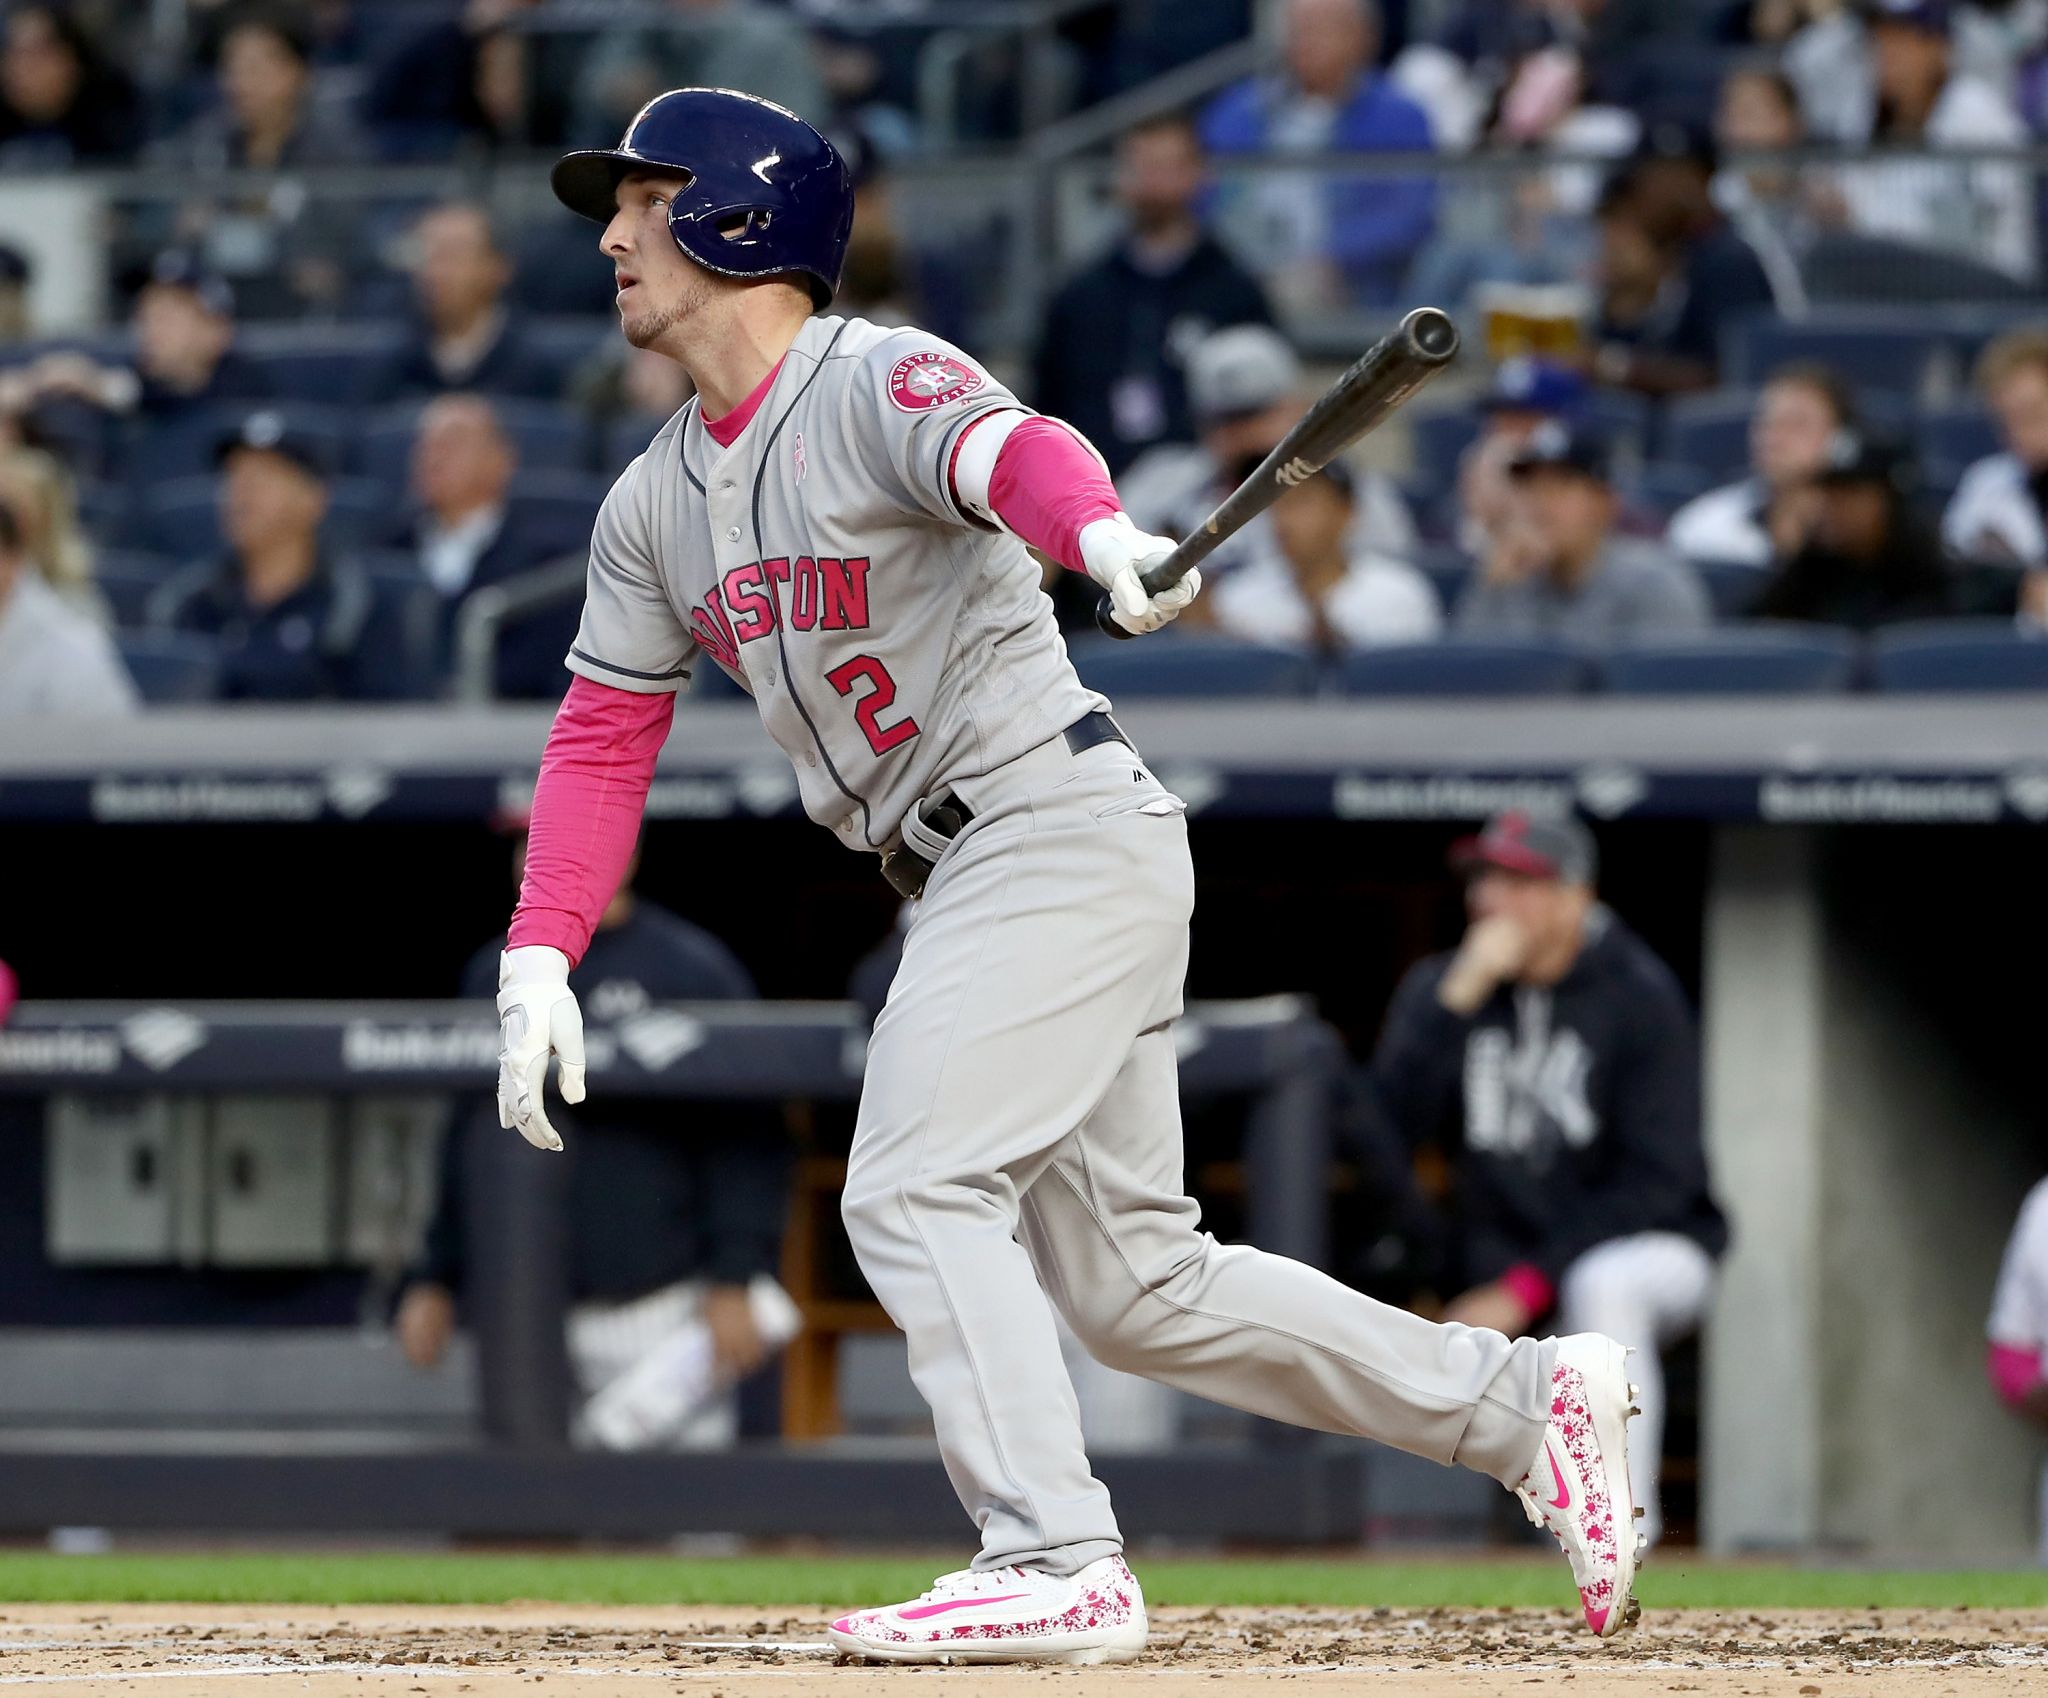 The curious case of Astros star Jose Altuve's pink Mother's Day cleat